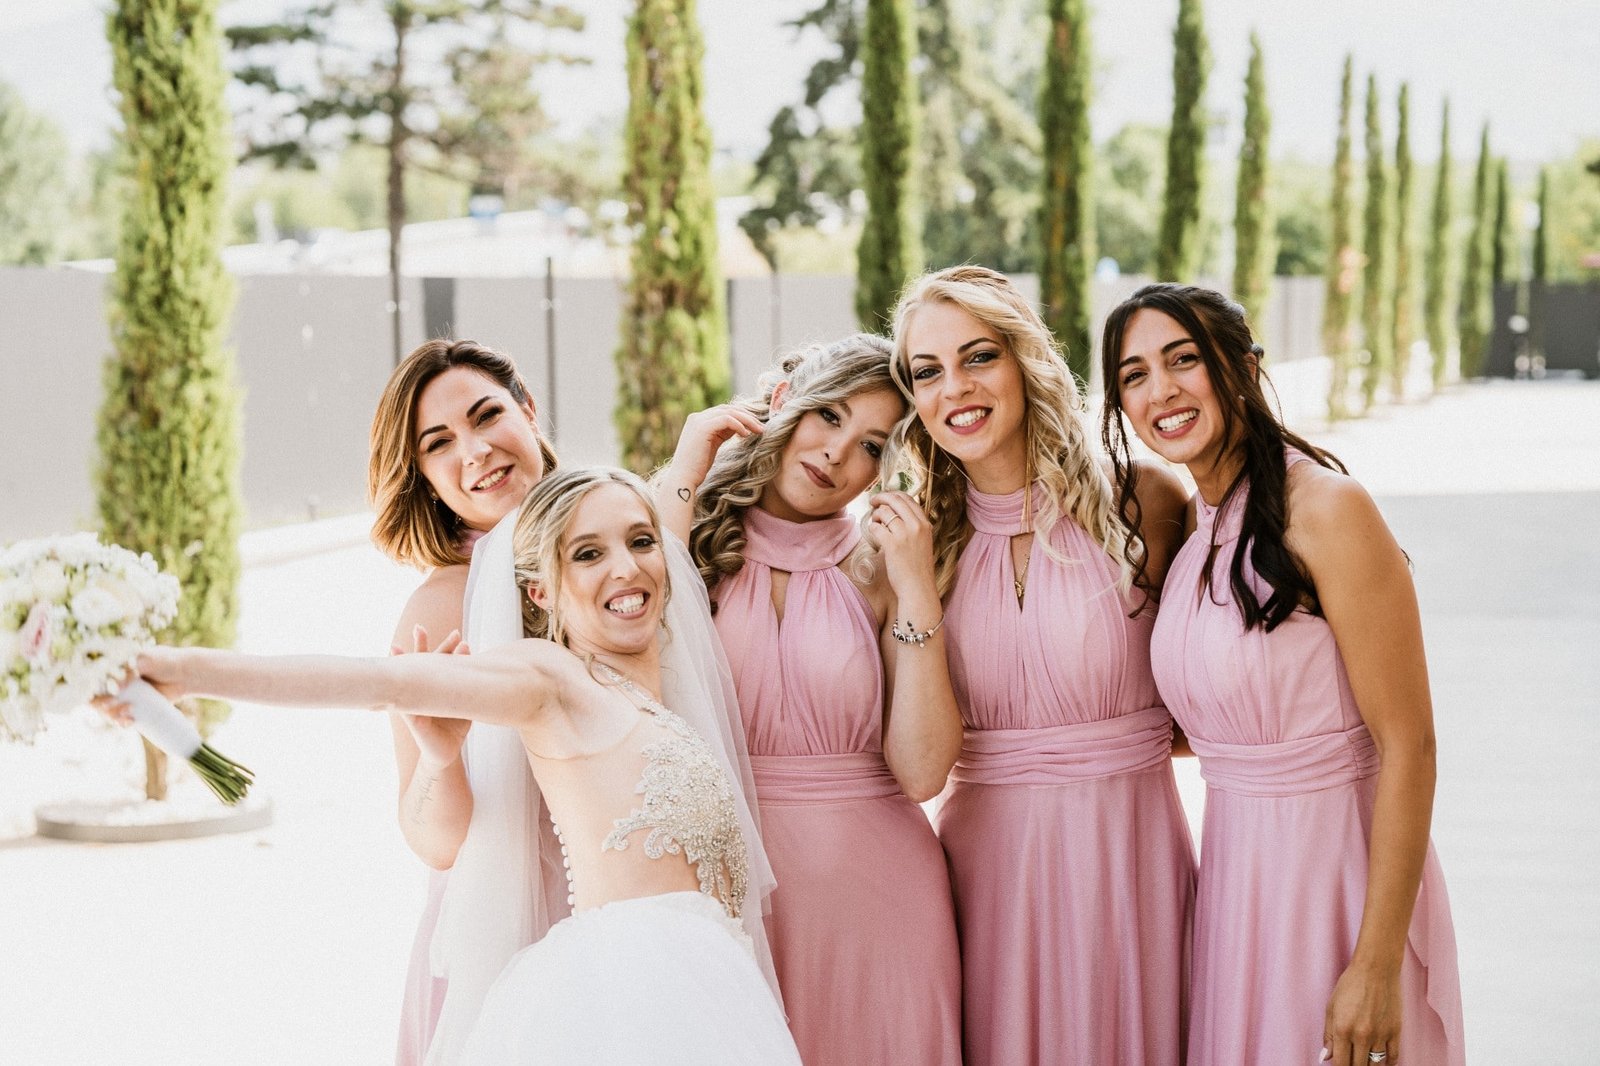 happy smiling bride with her brides maids